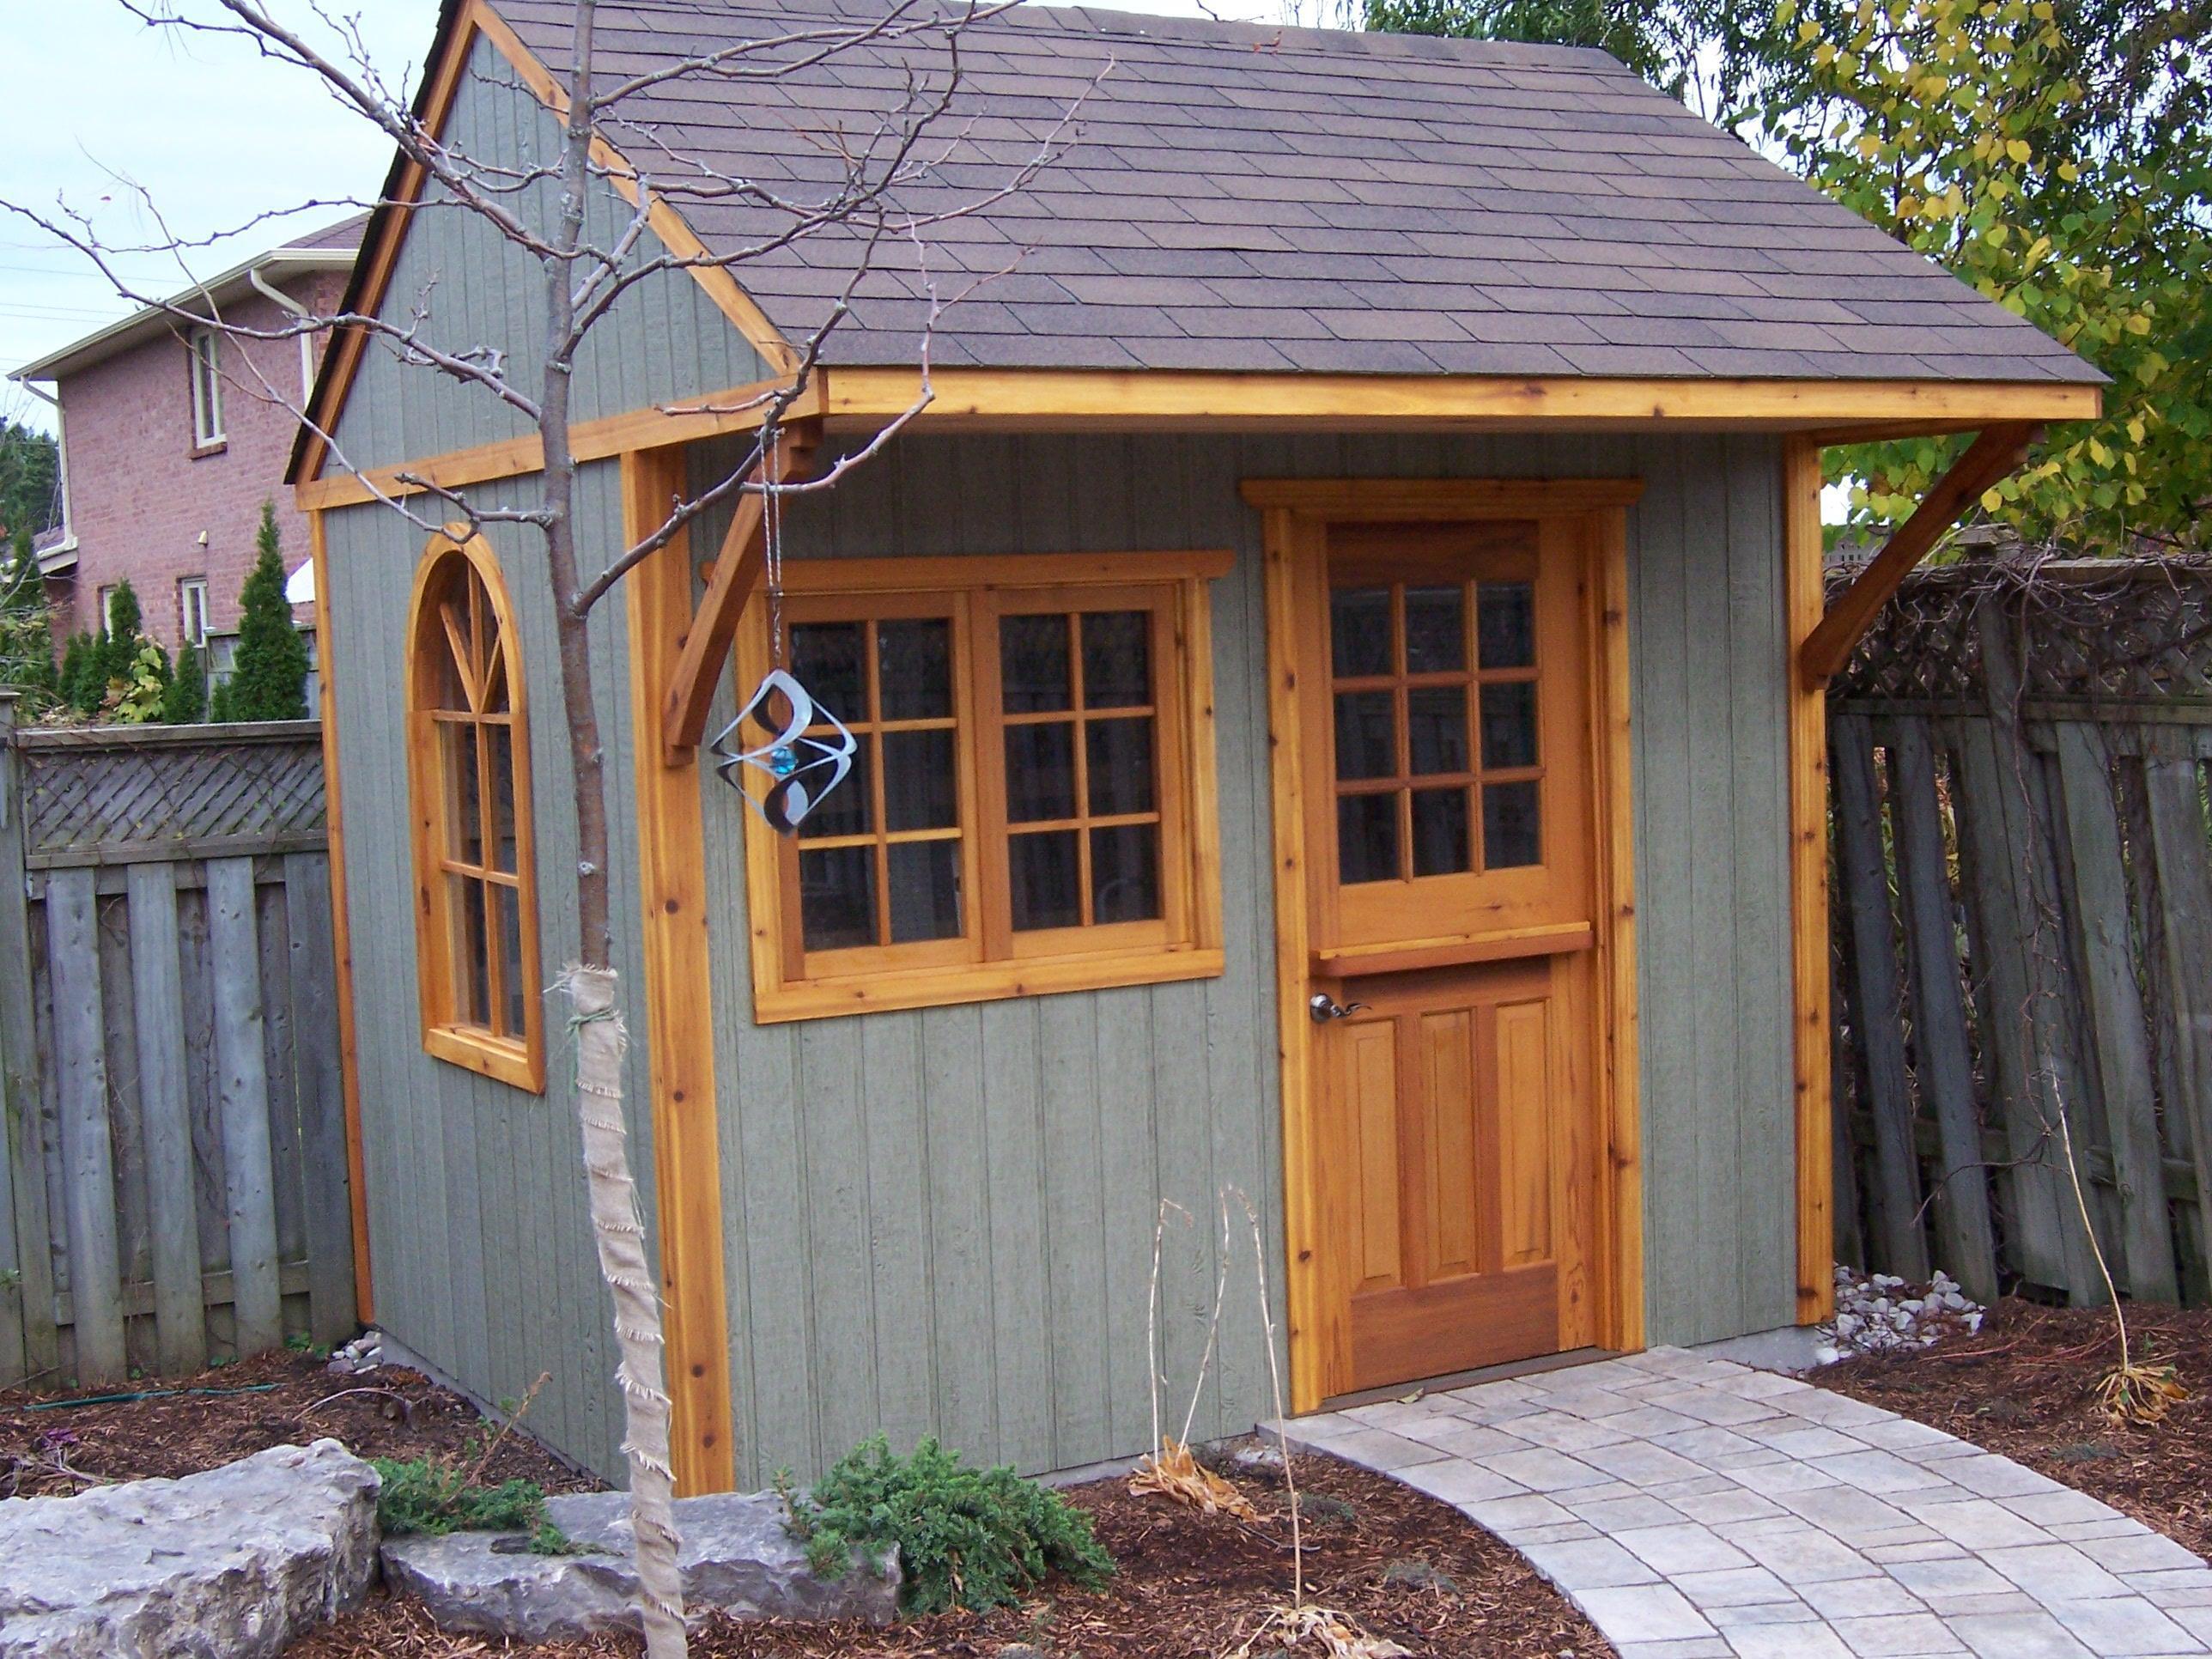 Canexel Glen Echo garden shed with bar window in Toronto Ontario. ID number 185988-5